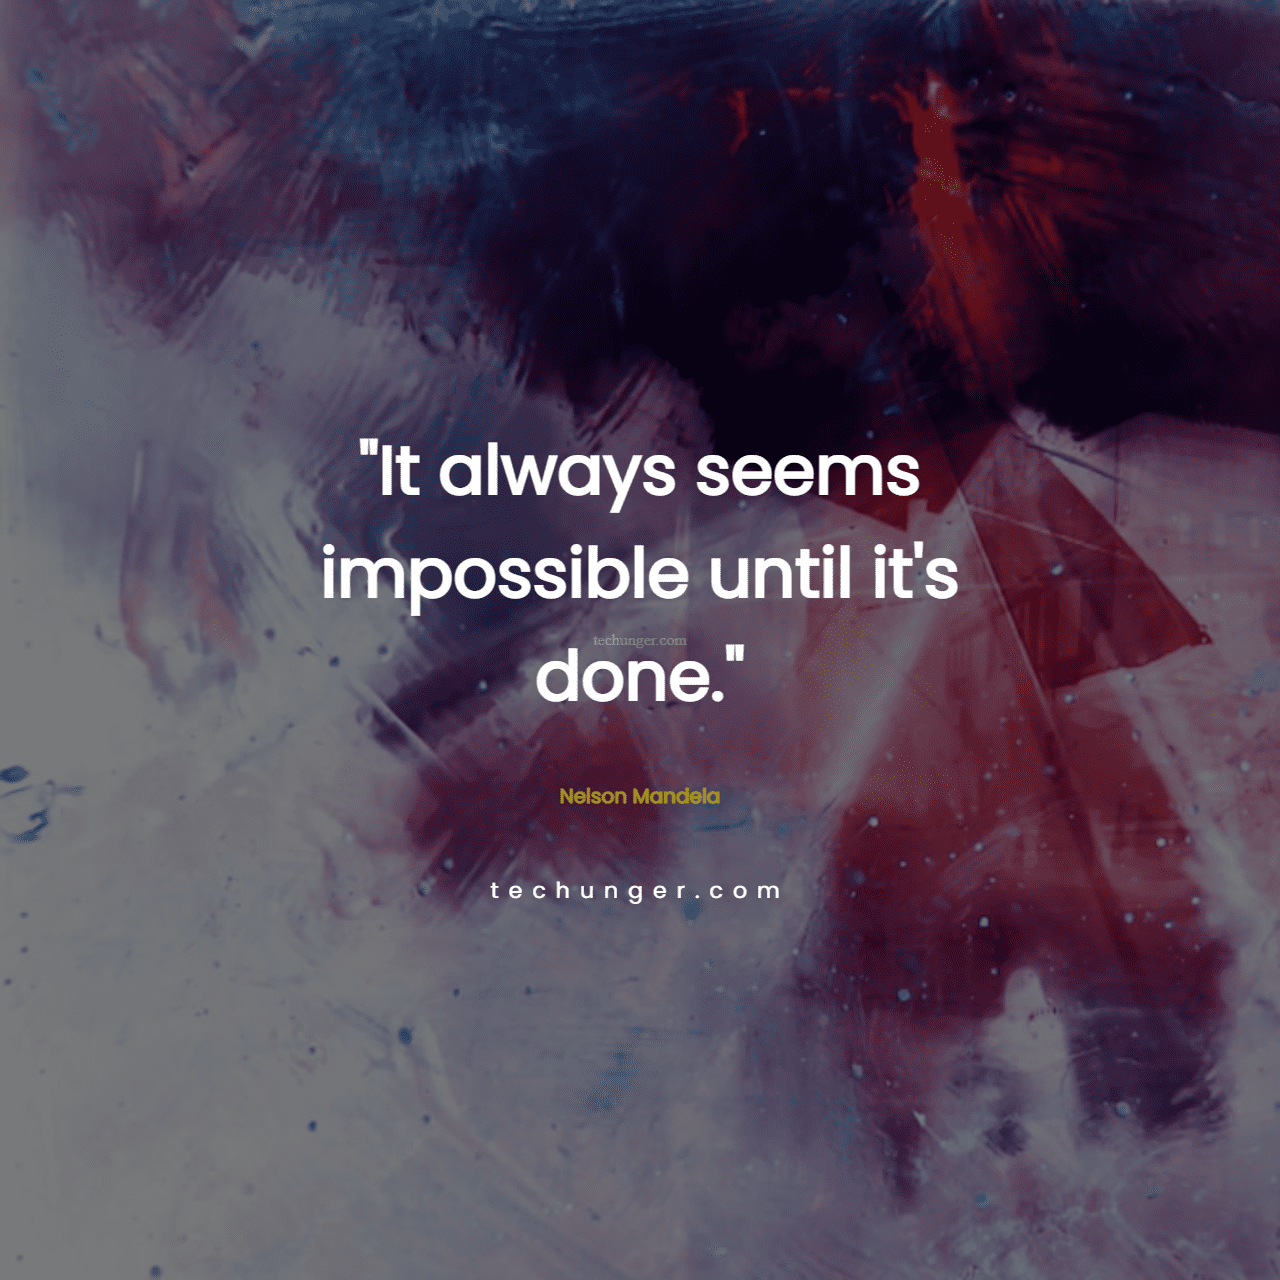 motivational,inspirational,quotes,It always seems impossible until it's done.
Nelson Mandela